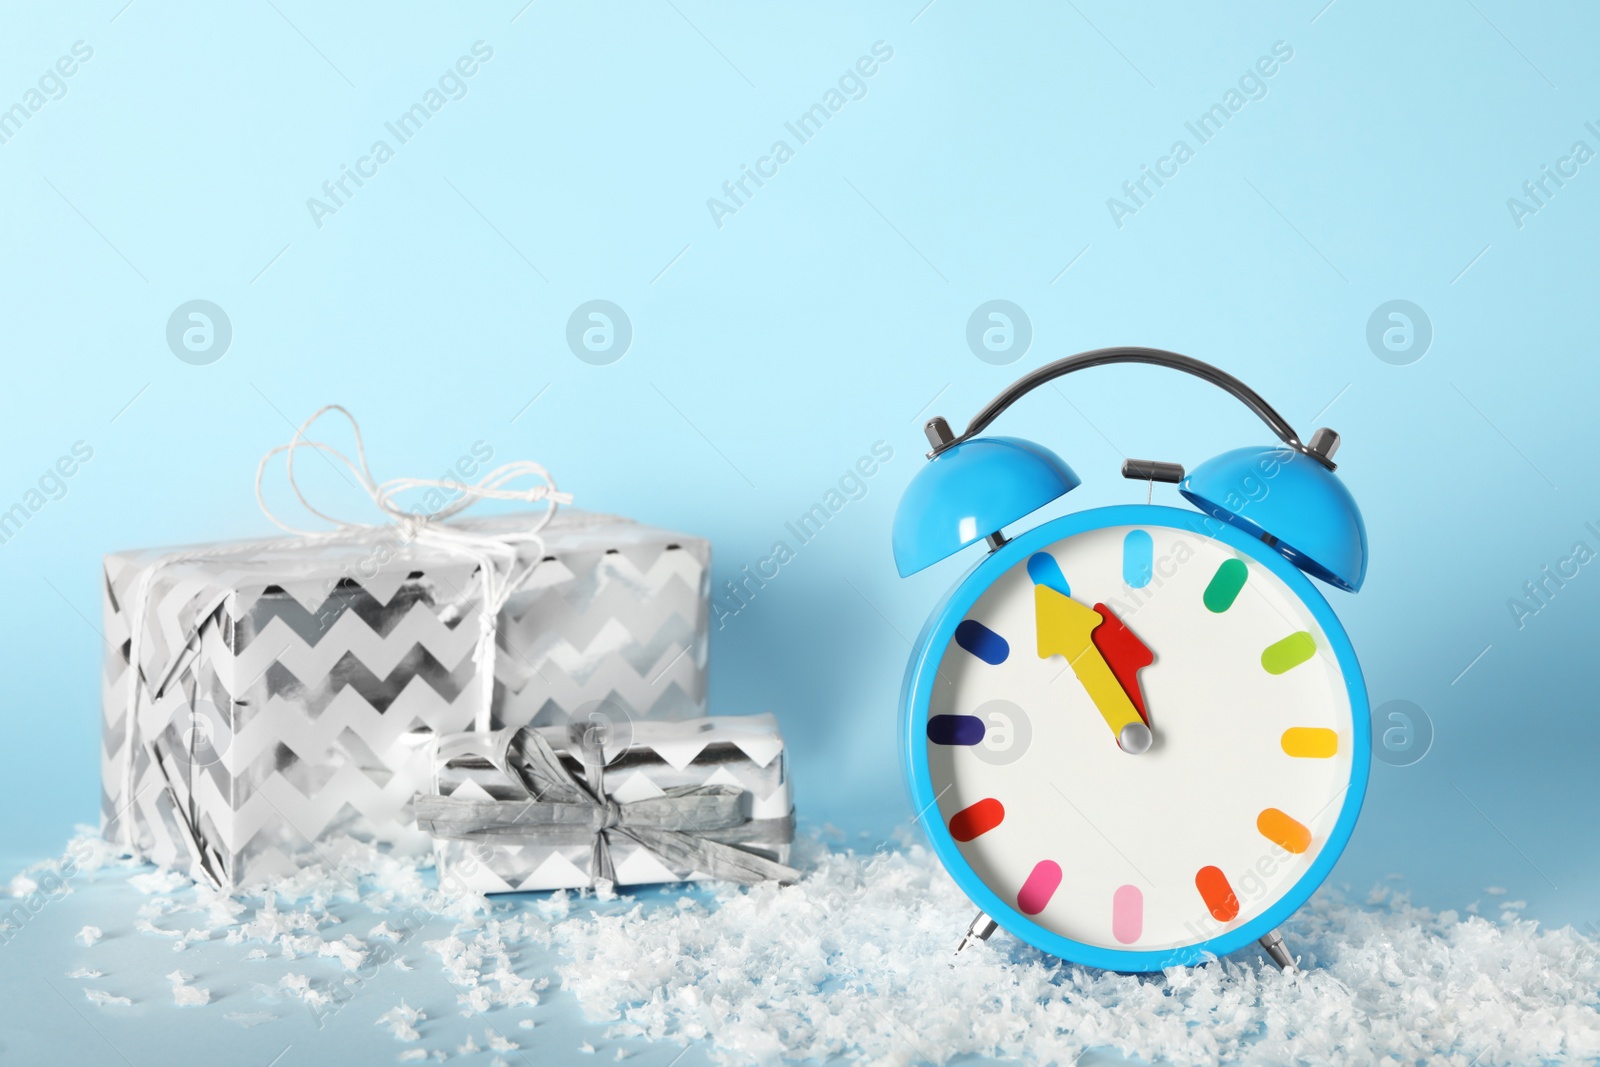 Photo of Alarm clock with Christmas decor on light blue background. New Year countdown